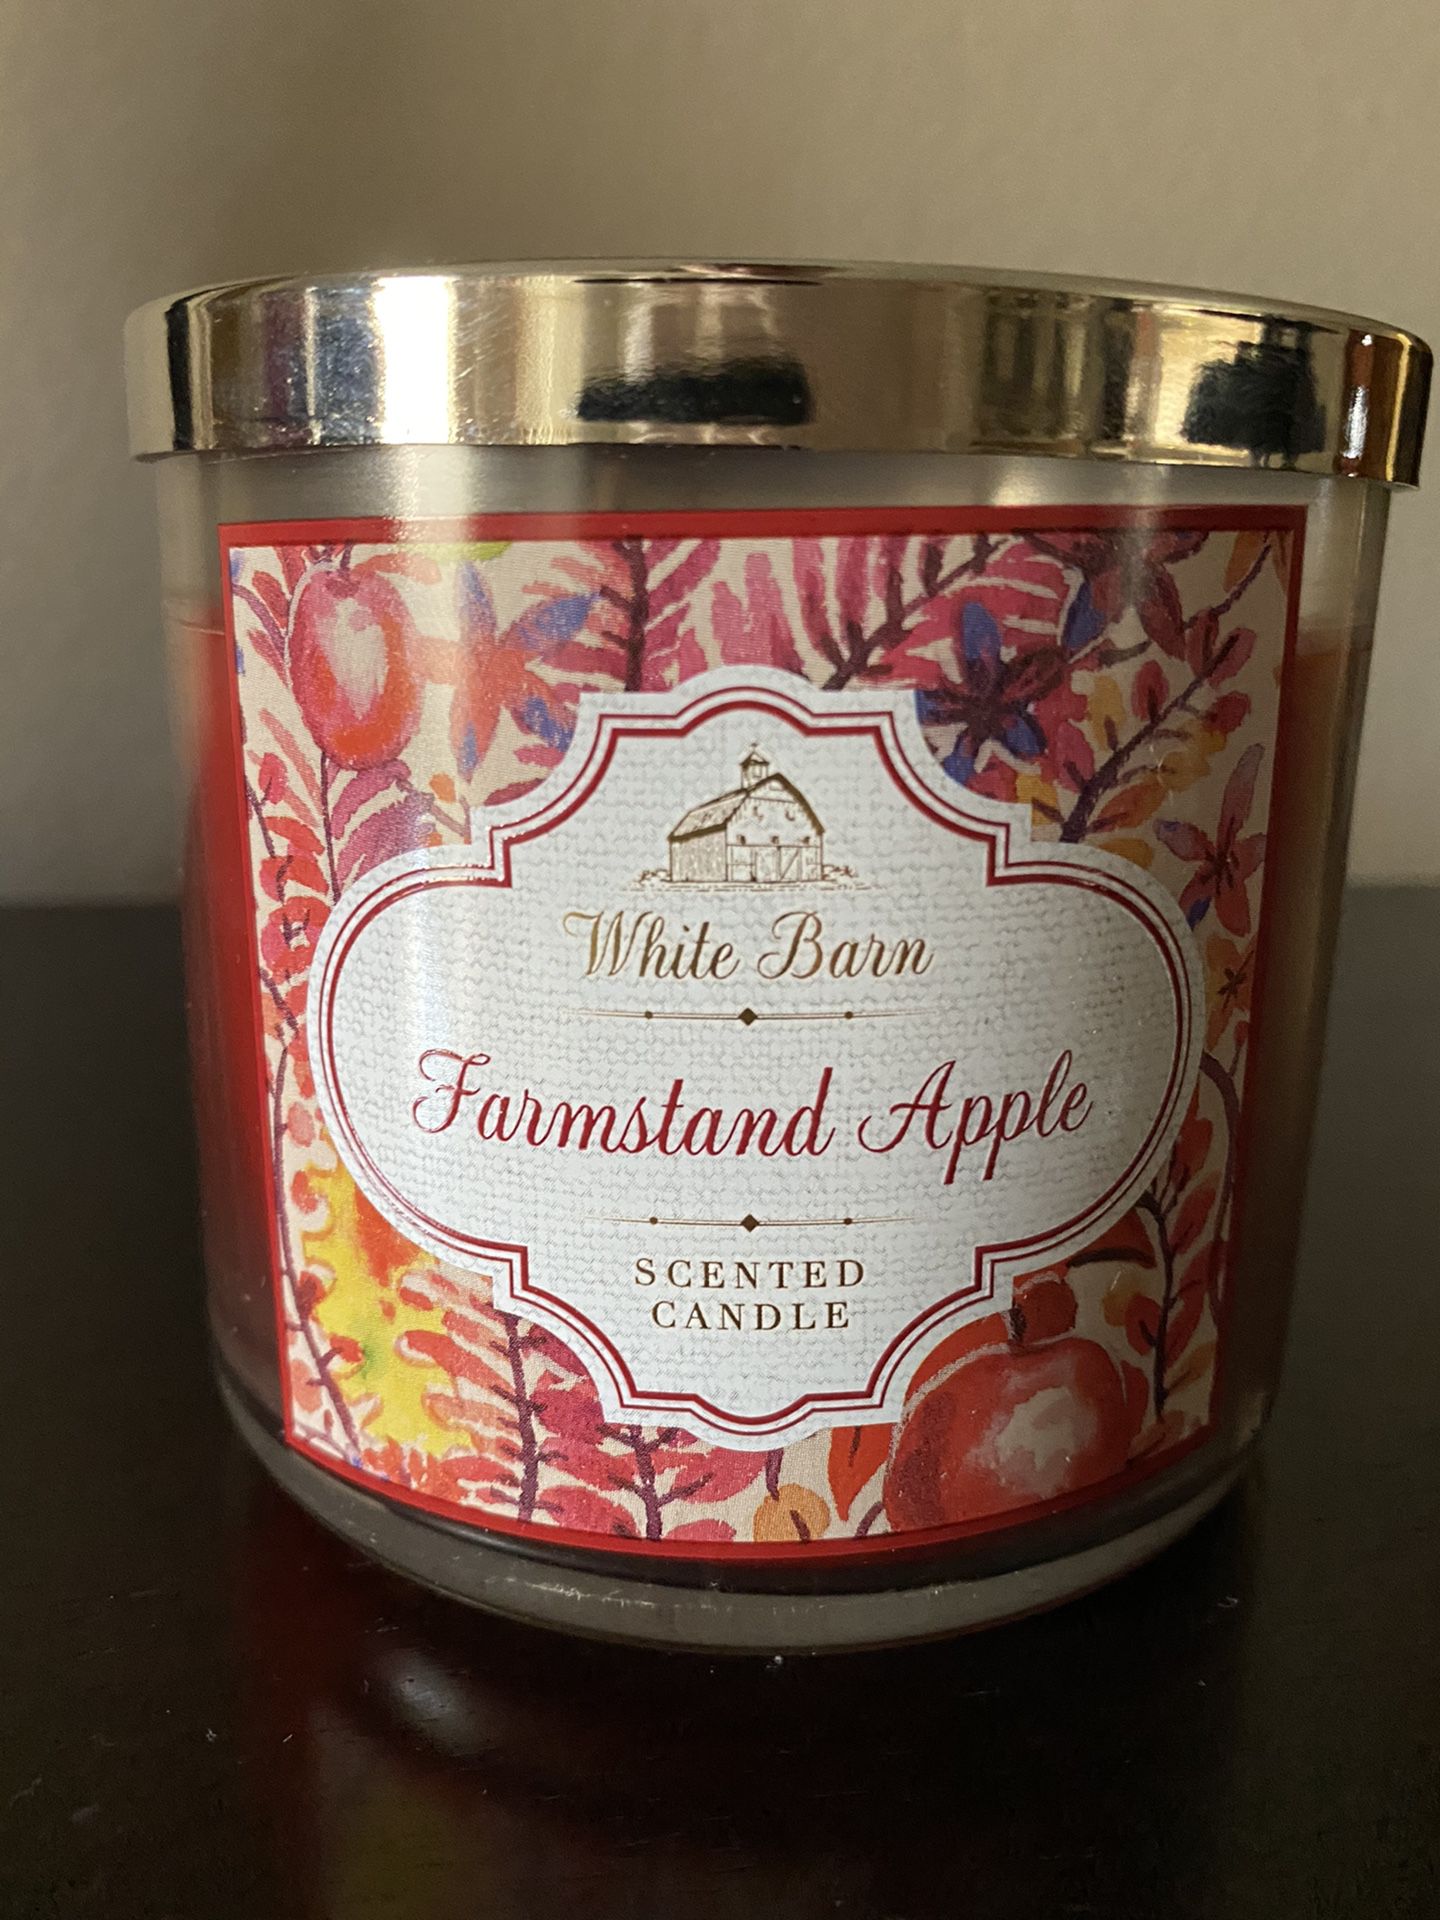 One of the best Bath & Body Works Candles “FARMSTAND APPLE” 🍎